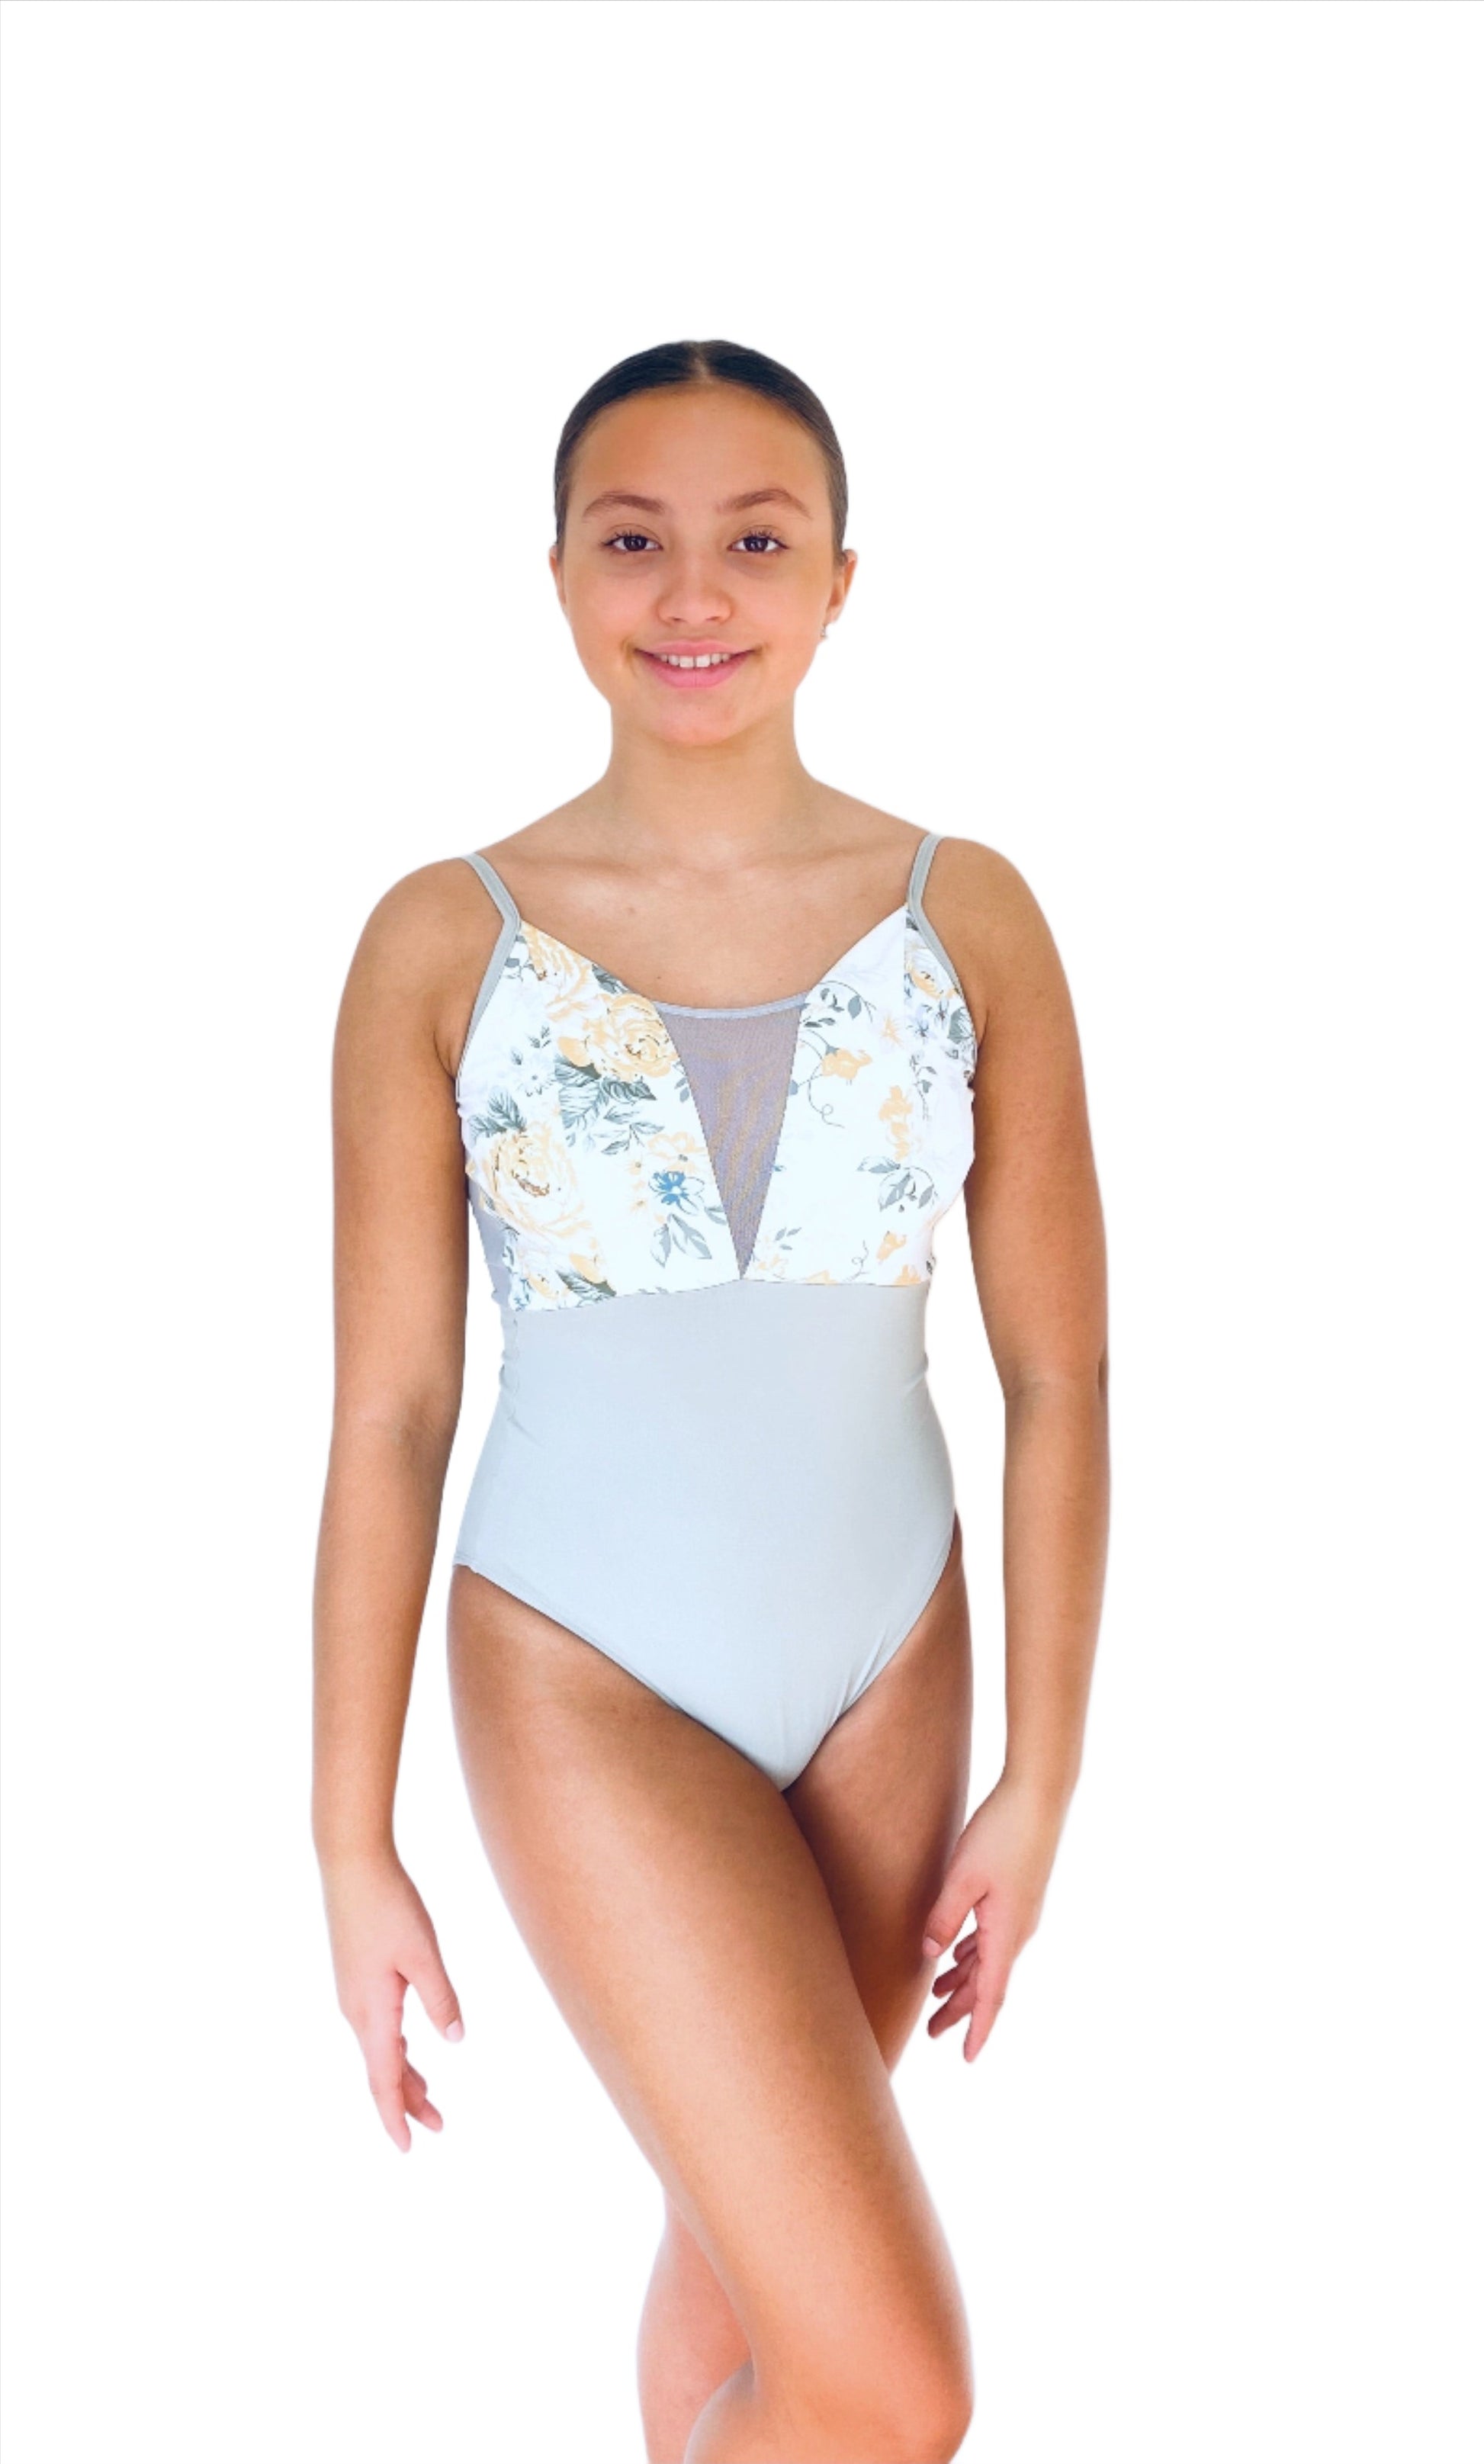 V-mesh camisole leotard in sage green with yellow floral print from The Collective Dancewear